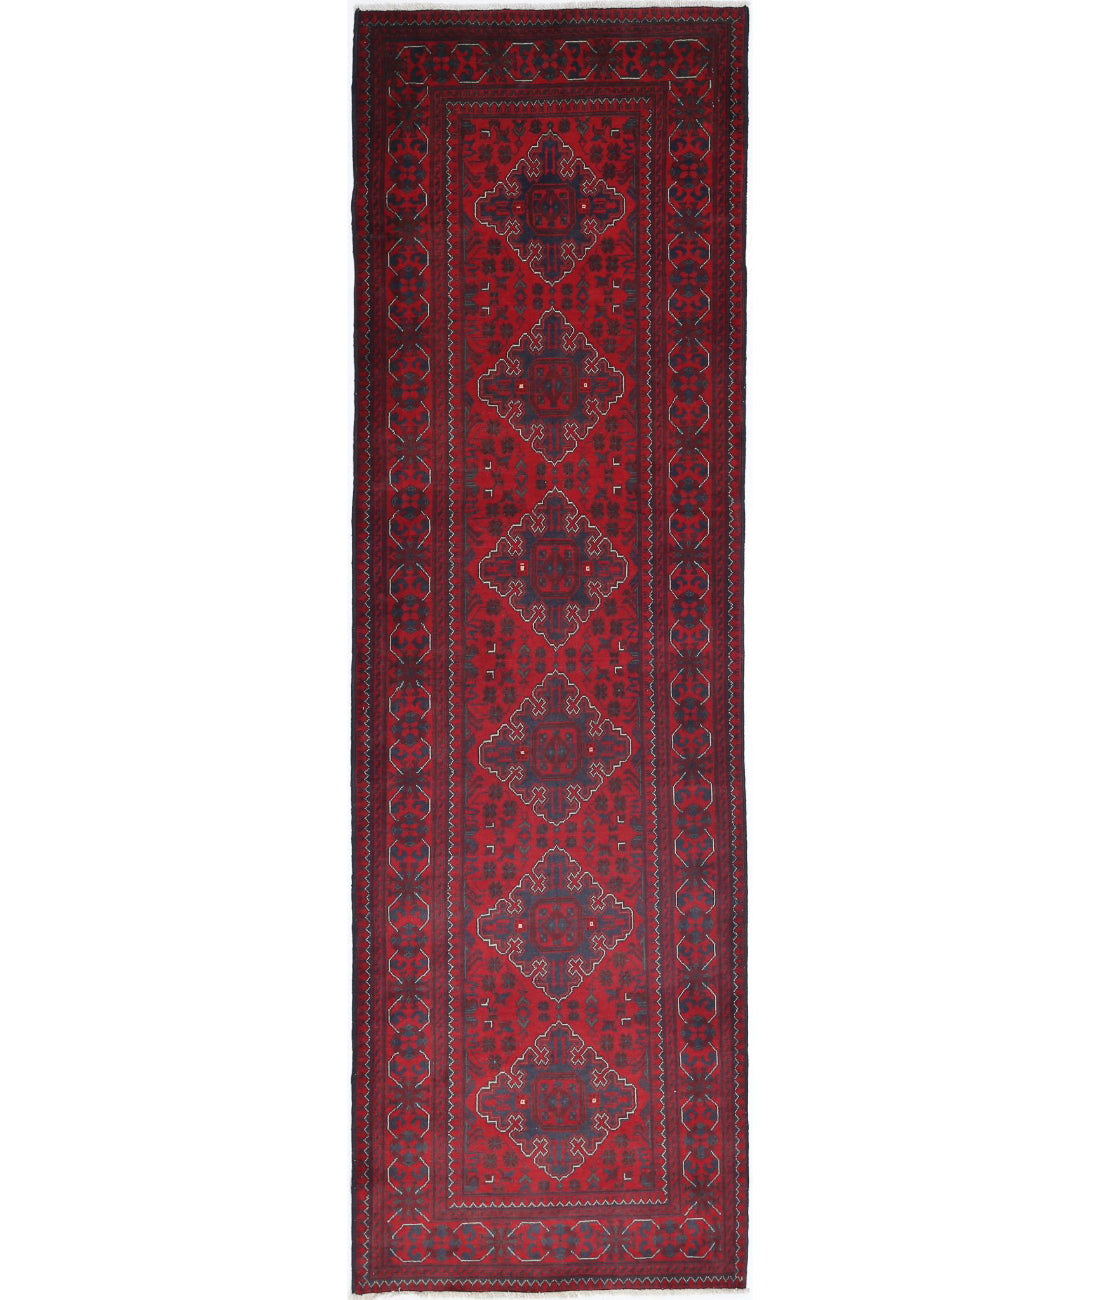 Afghan 2'9'' X 9'3'' Hand-Knotted Wool Rug 2'9'' x 9'3'' (83 X 278) / Red / N/A